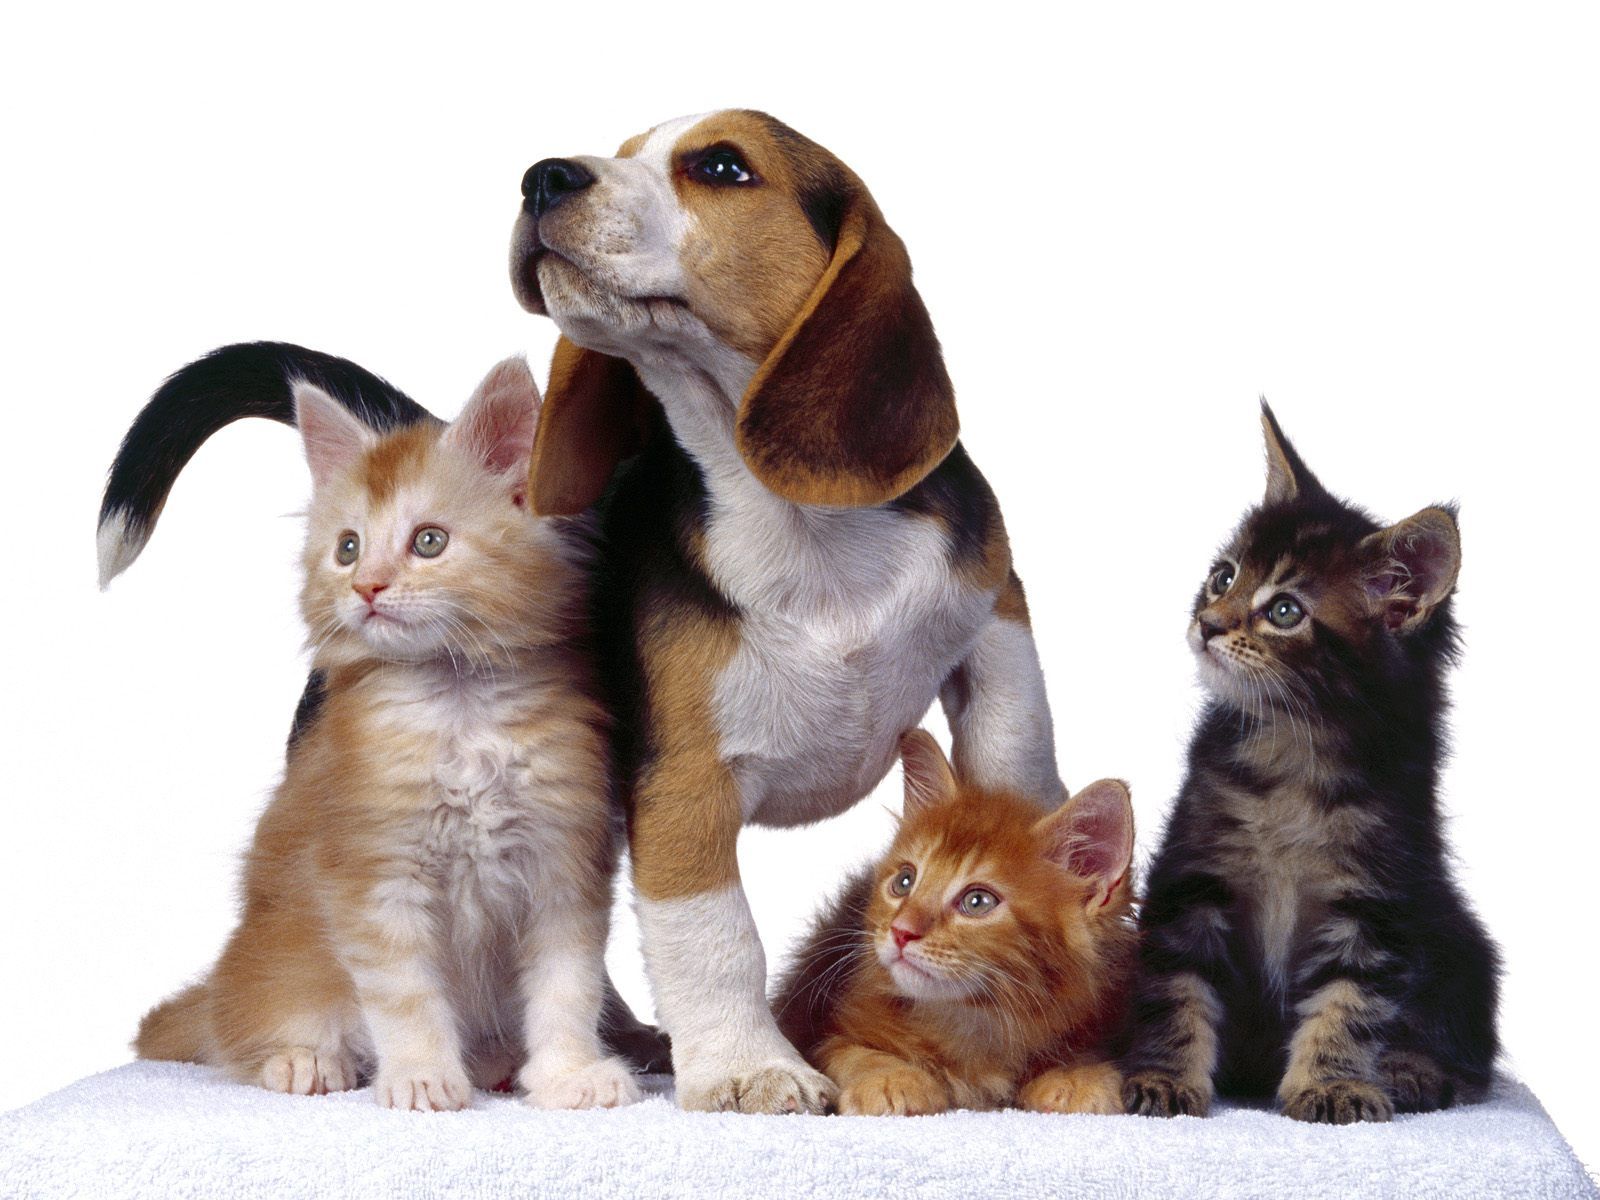 Dogs Wallpaper: three cats and a dog wallpaper